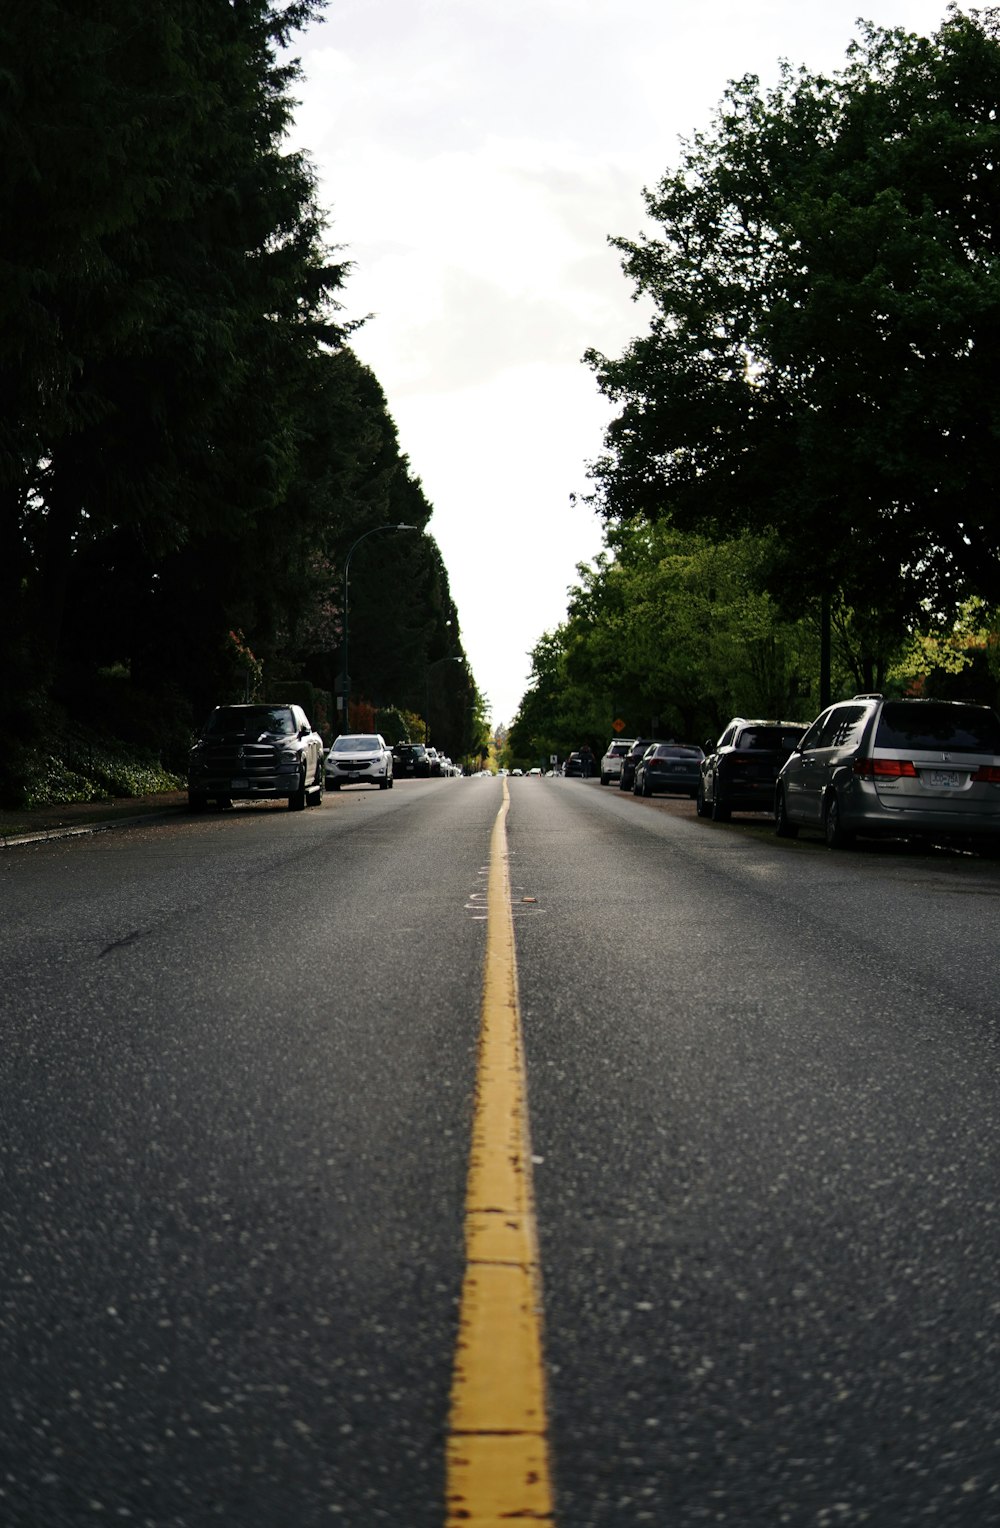 a street lined with parked cars and trees